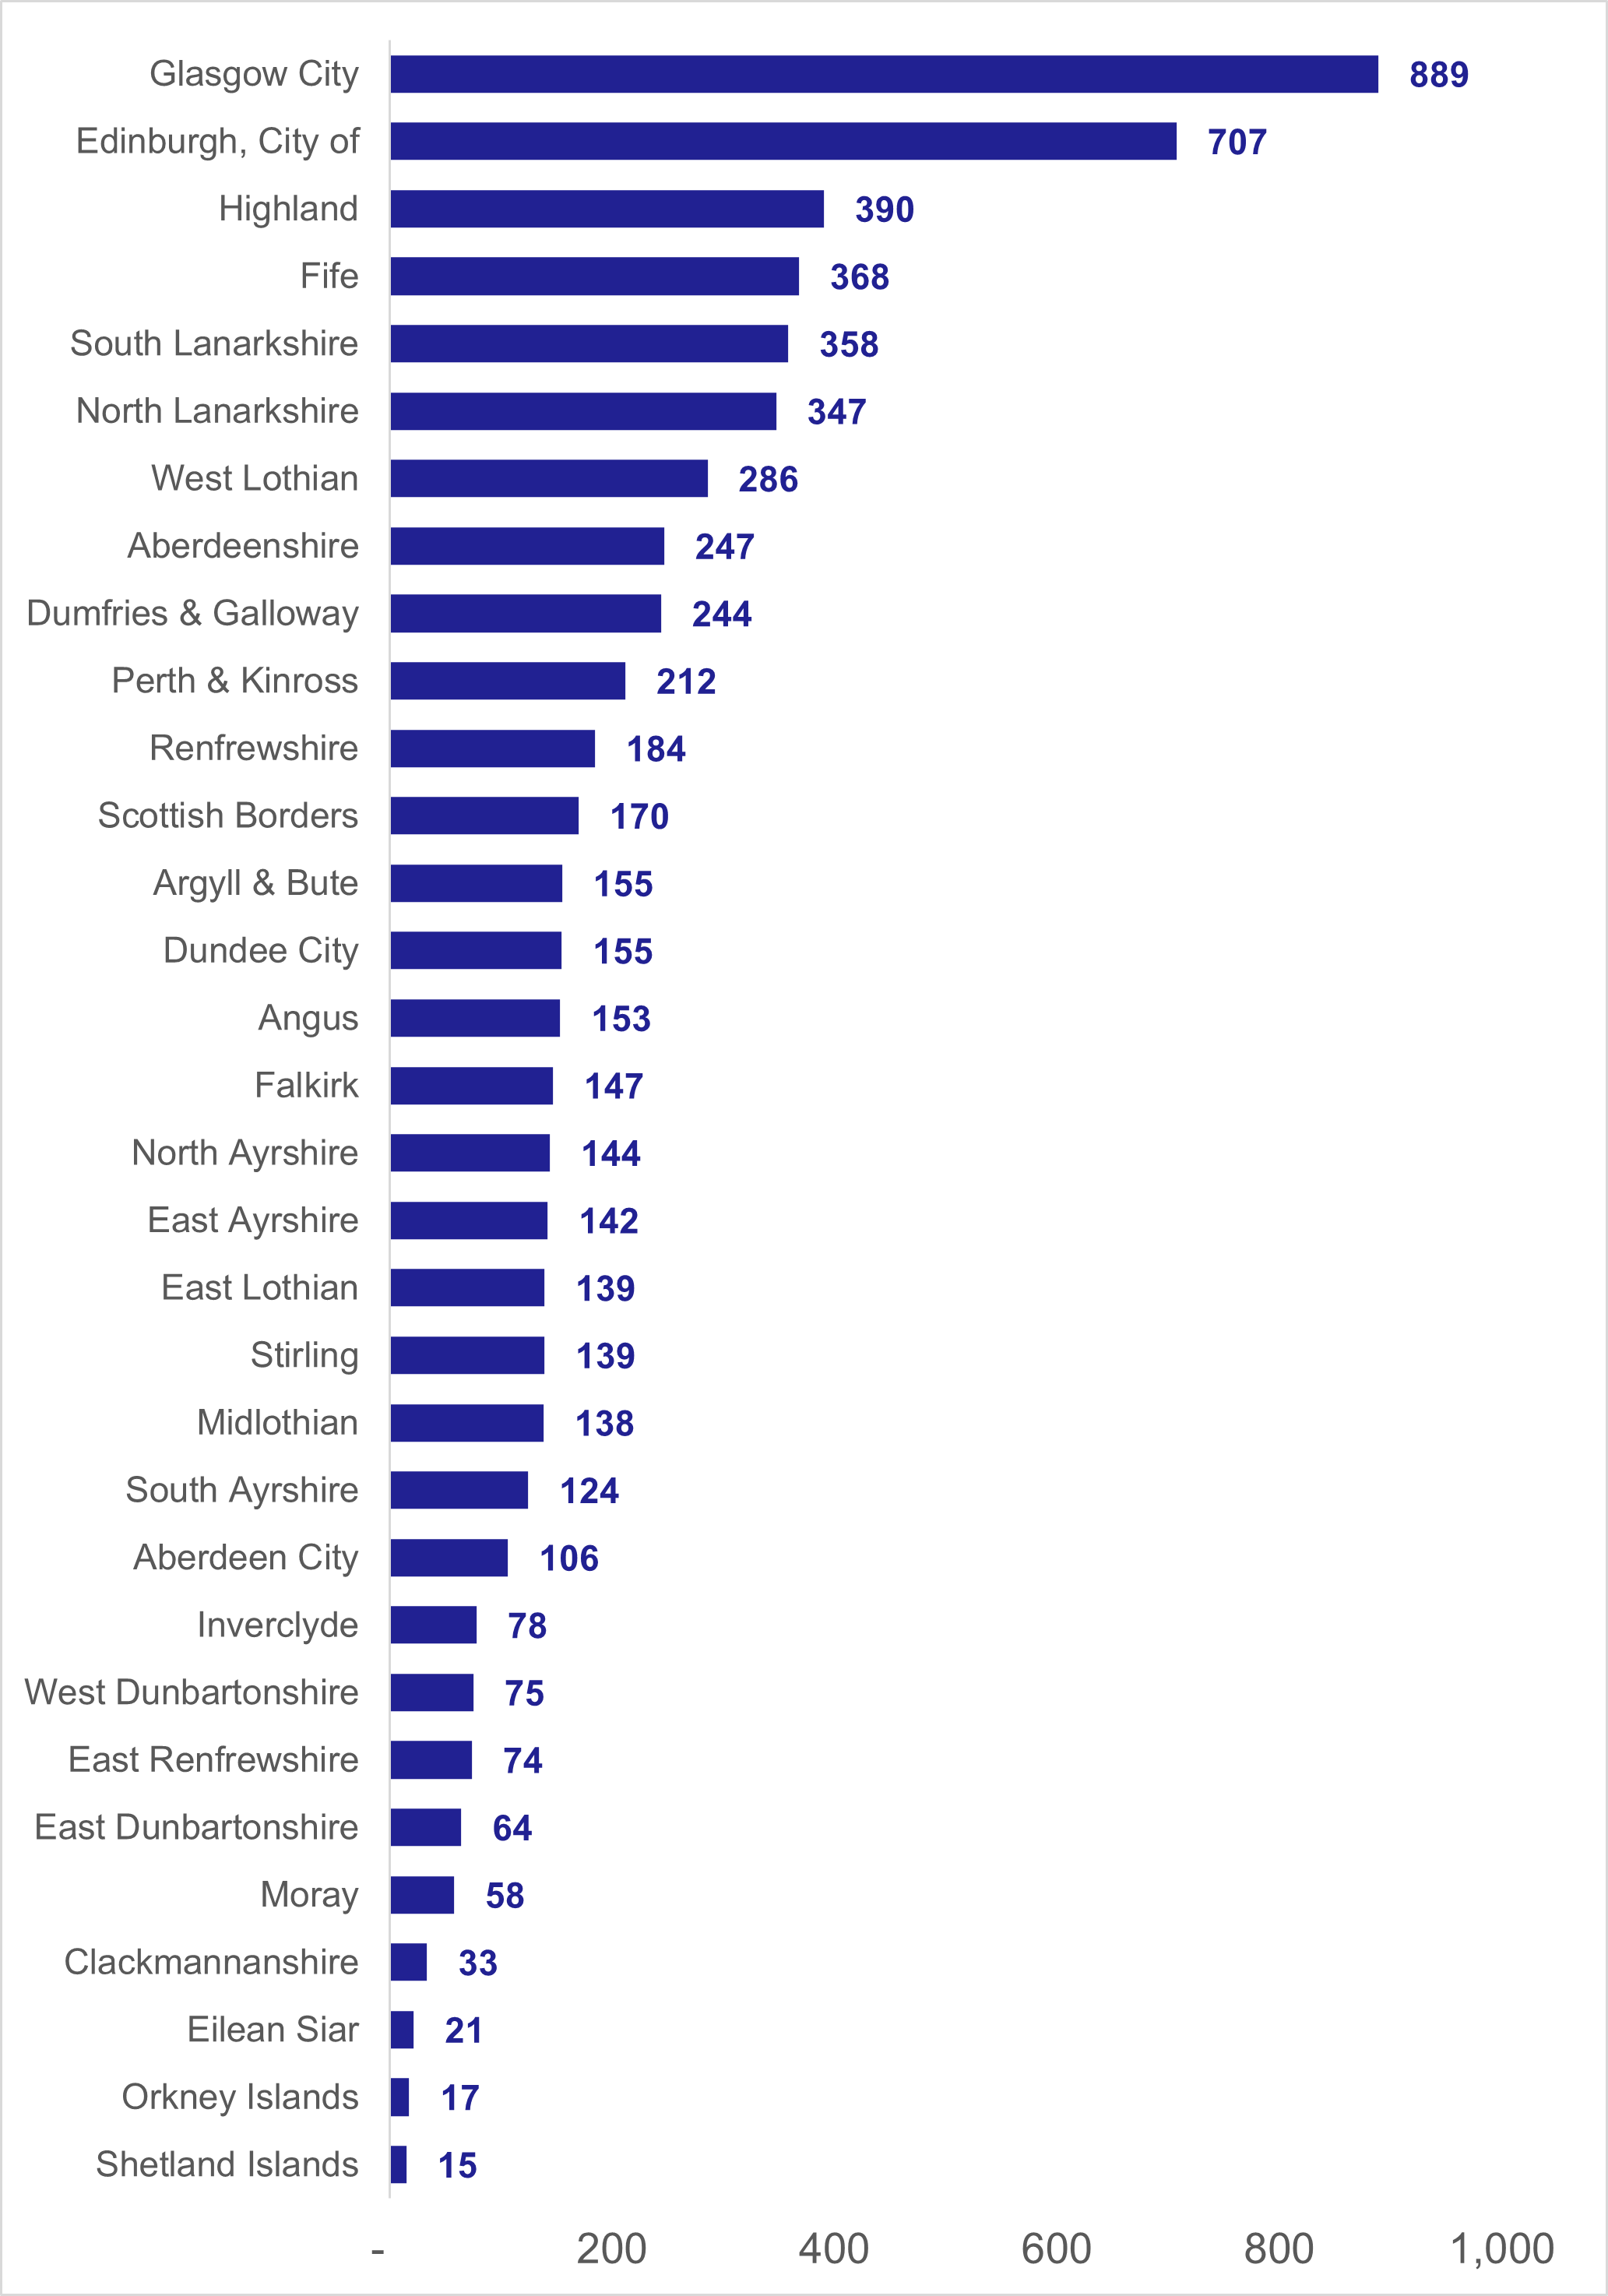 Figure 10: Average number of reported road casualties by Local Authority, 2018-2022 - as described in text above